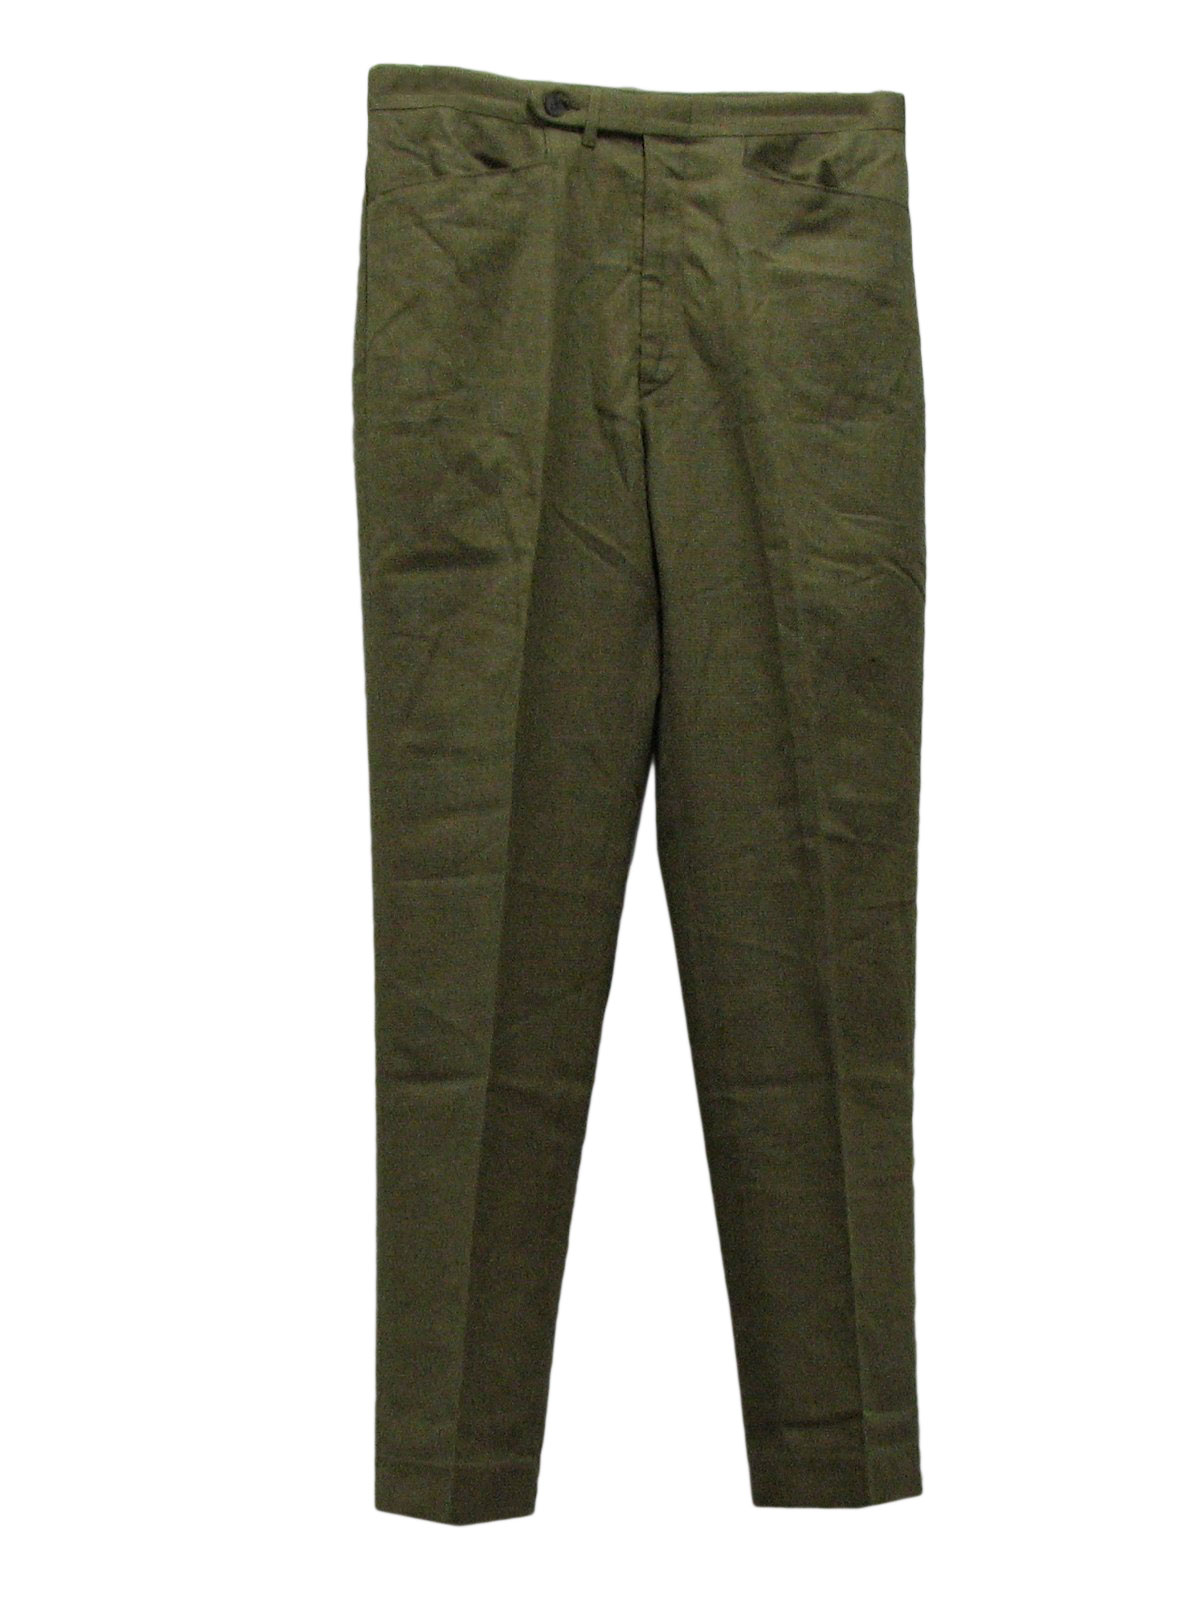 Vintage 60s Pants: Late 60s or early 70s -No Label- Mens olive with ...